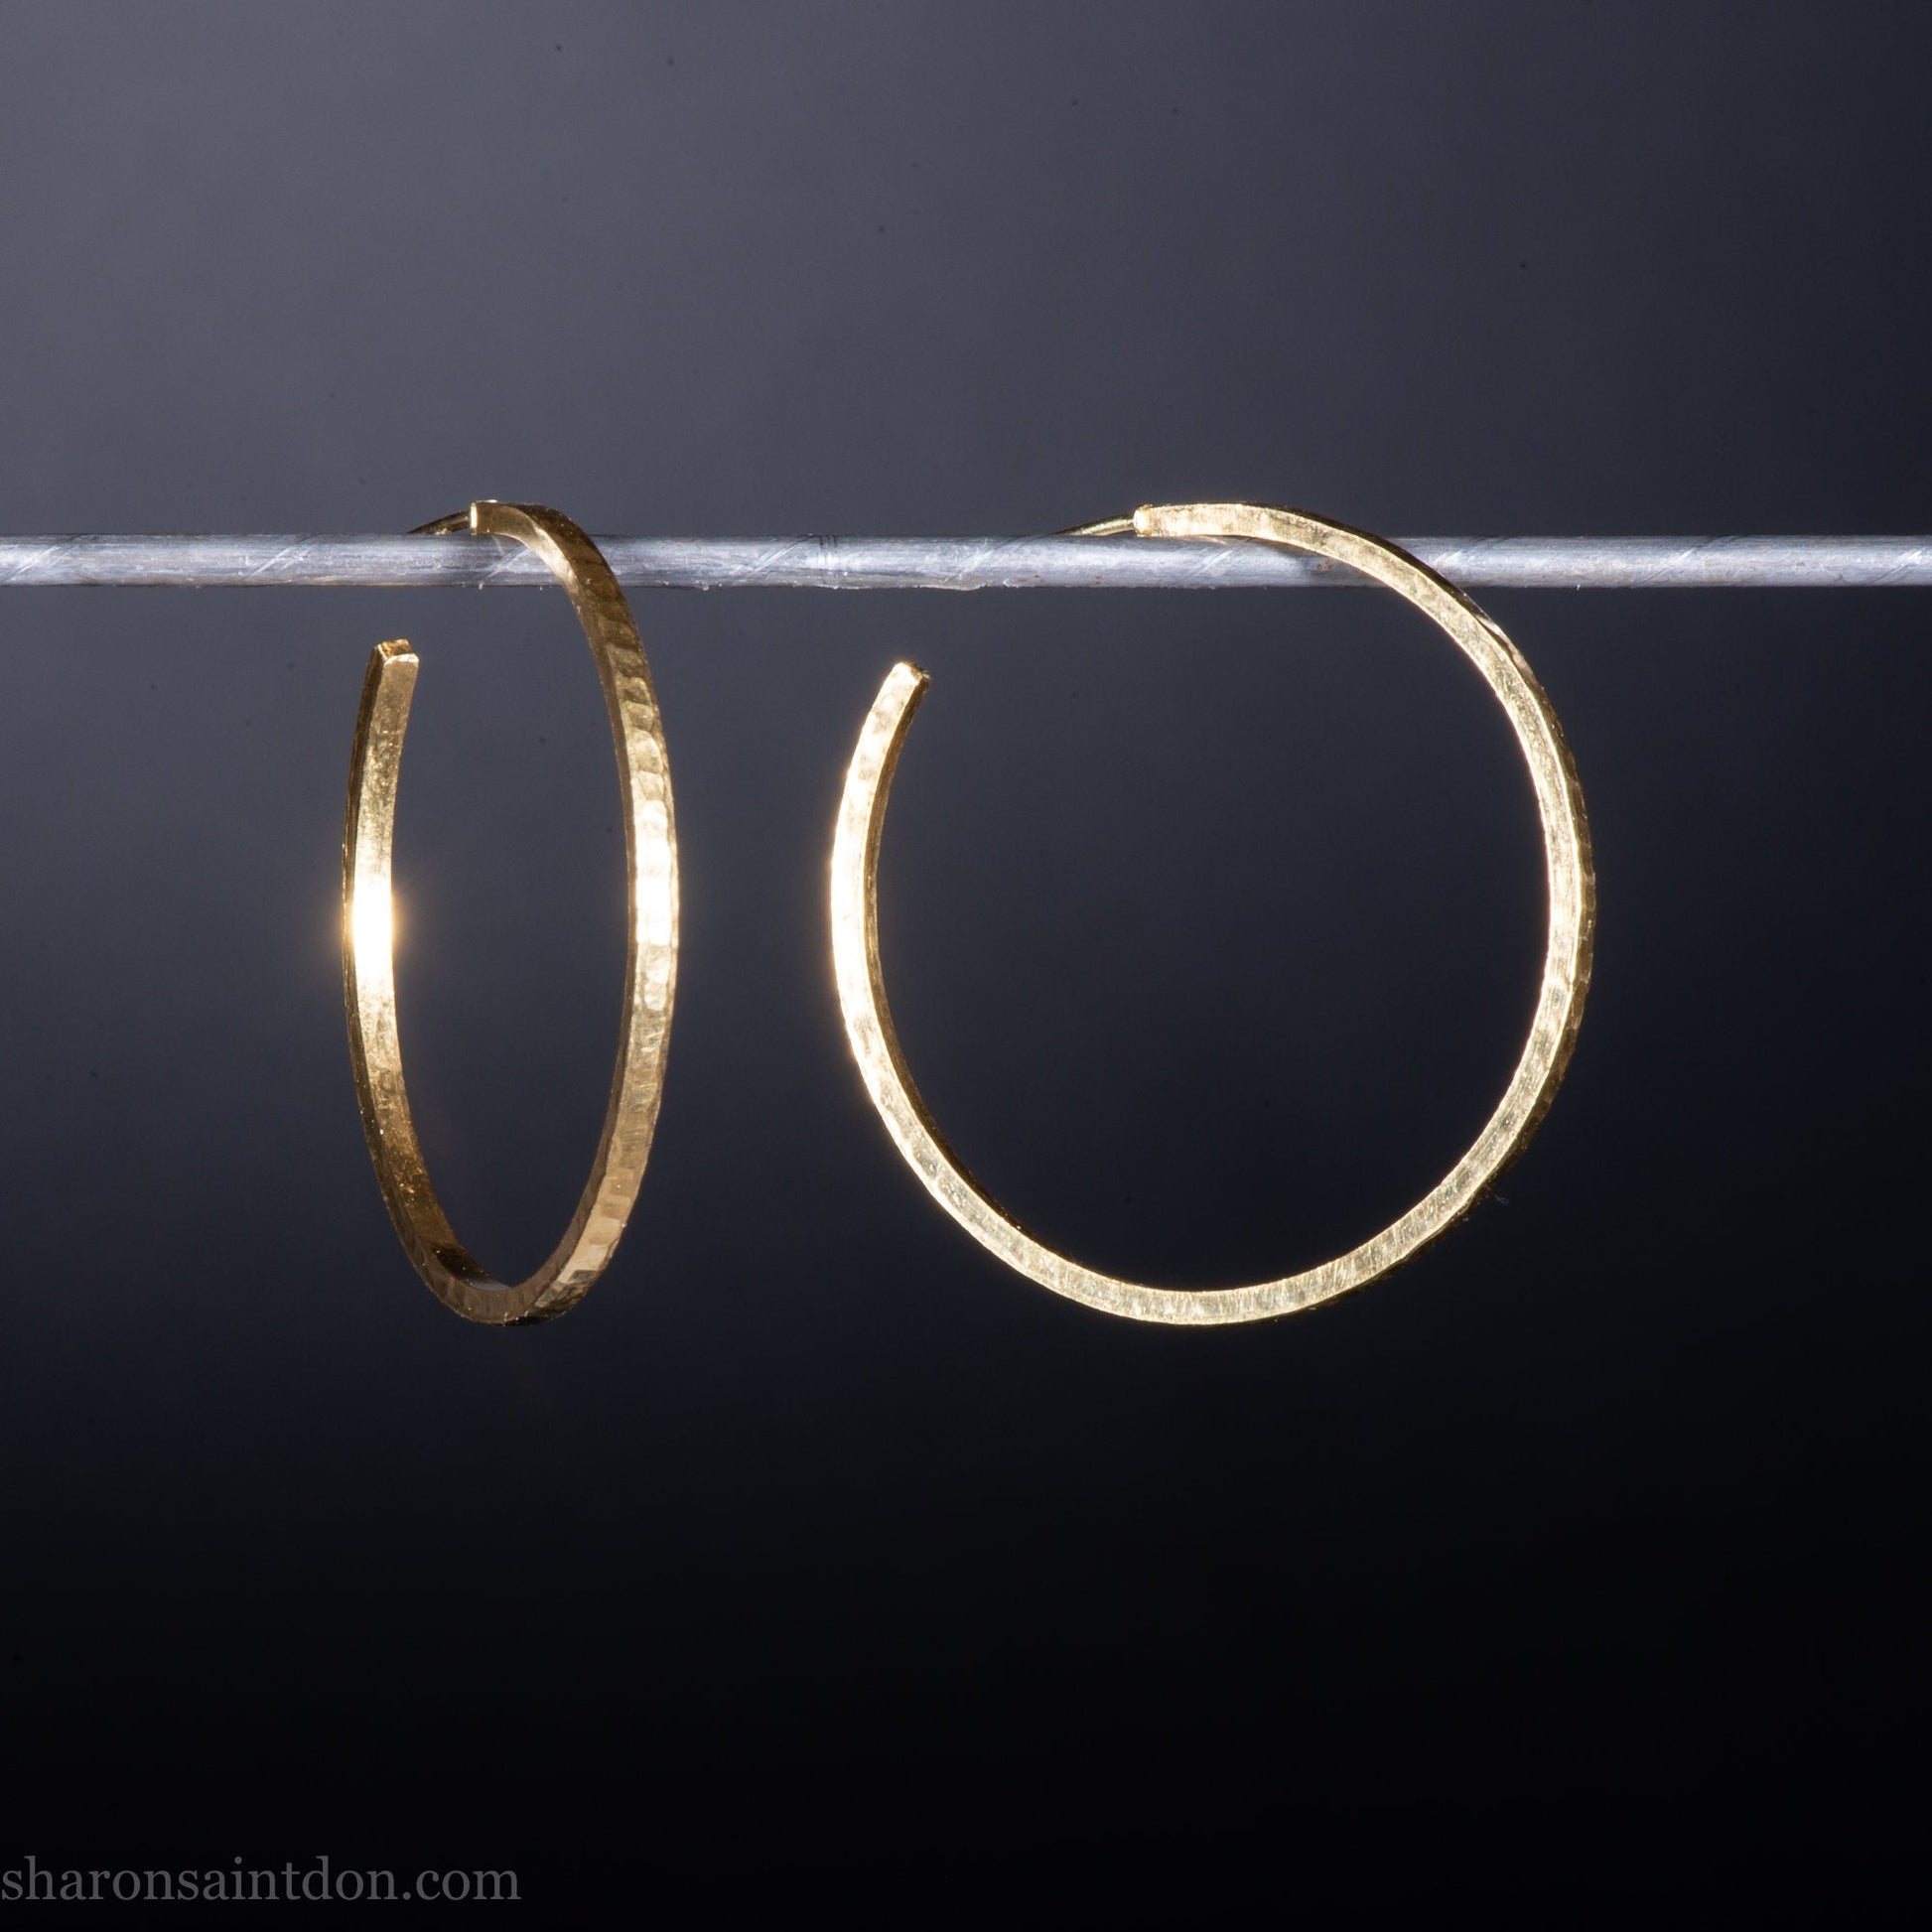 14k yellow gold hoop earrings 30mm diameter, 2mm wide, 1.5mm thick. High quality, handmade with hammered texture, solid gold posts and locking backs.